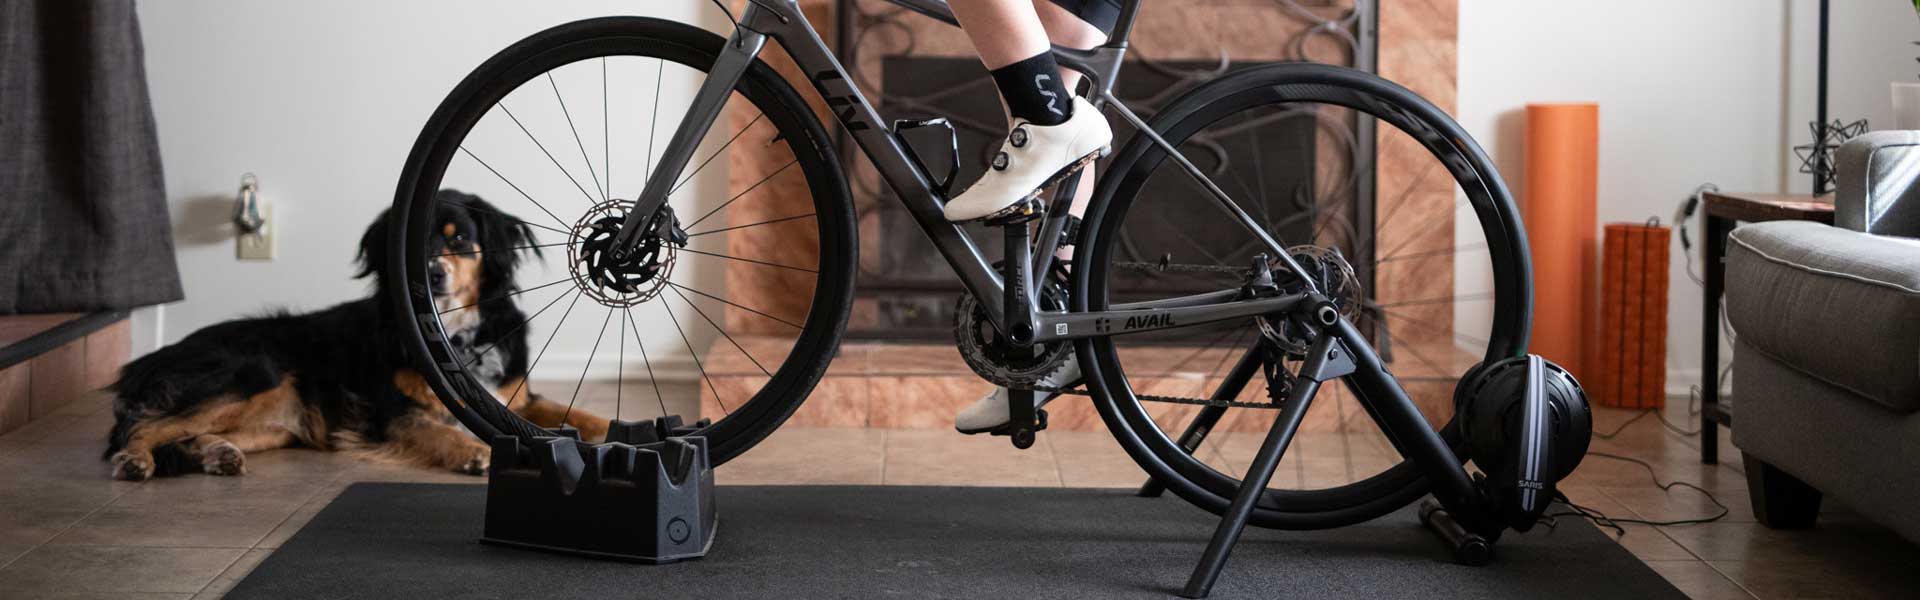 rear wheel bike exercise stand